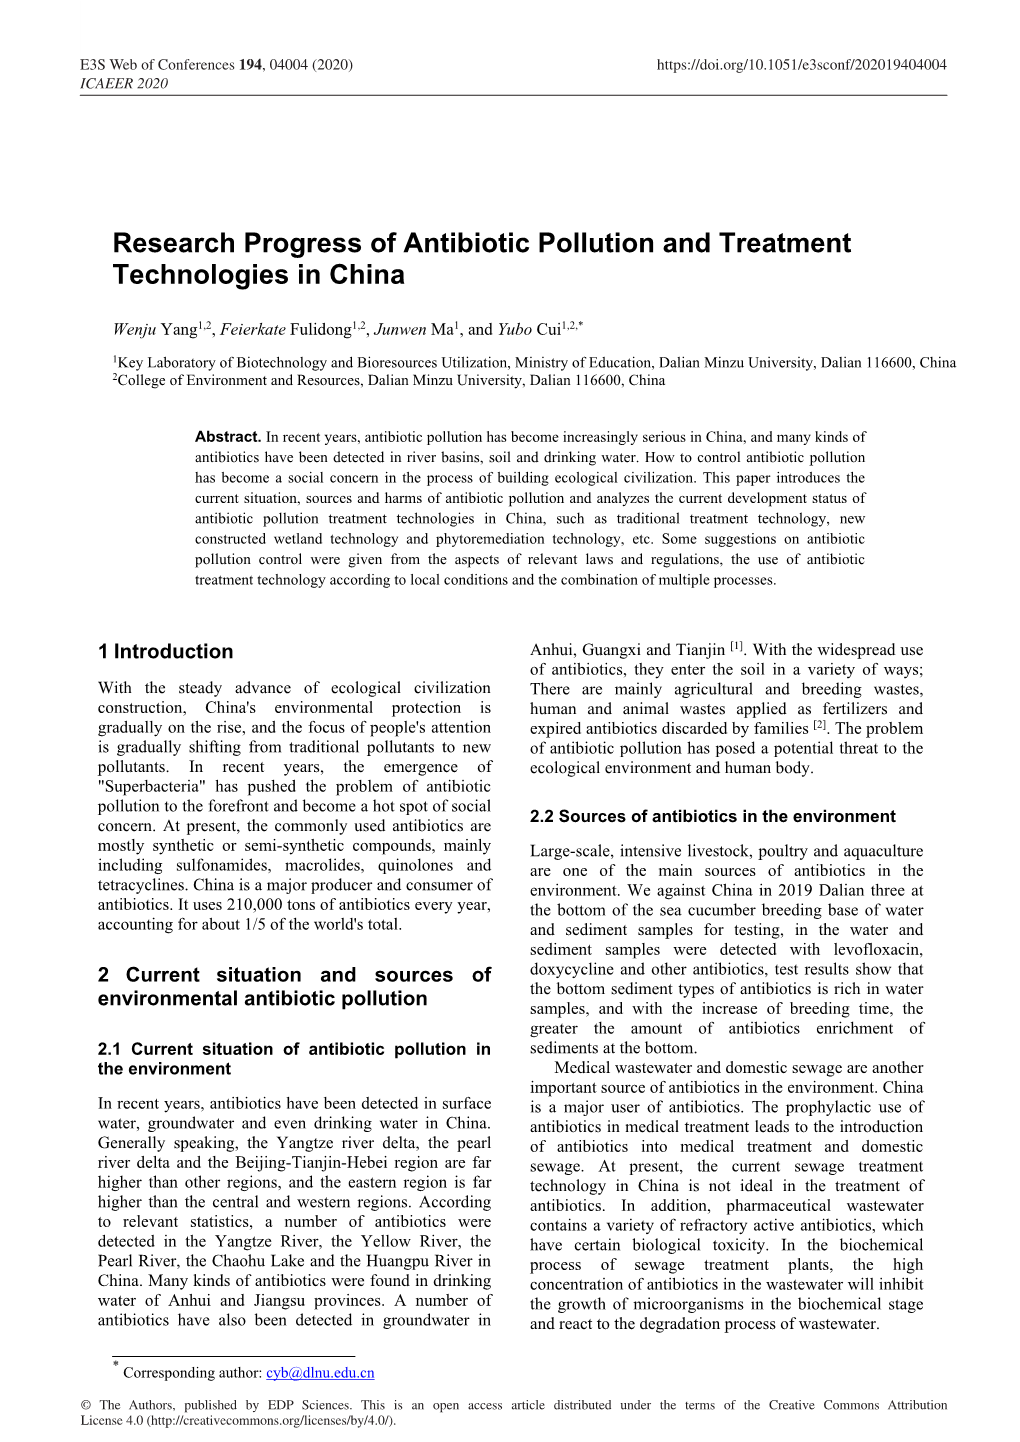 Research Progress of Antibiotic Pollution and Treatment Technologies in China